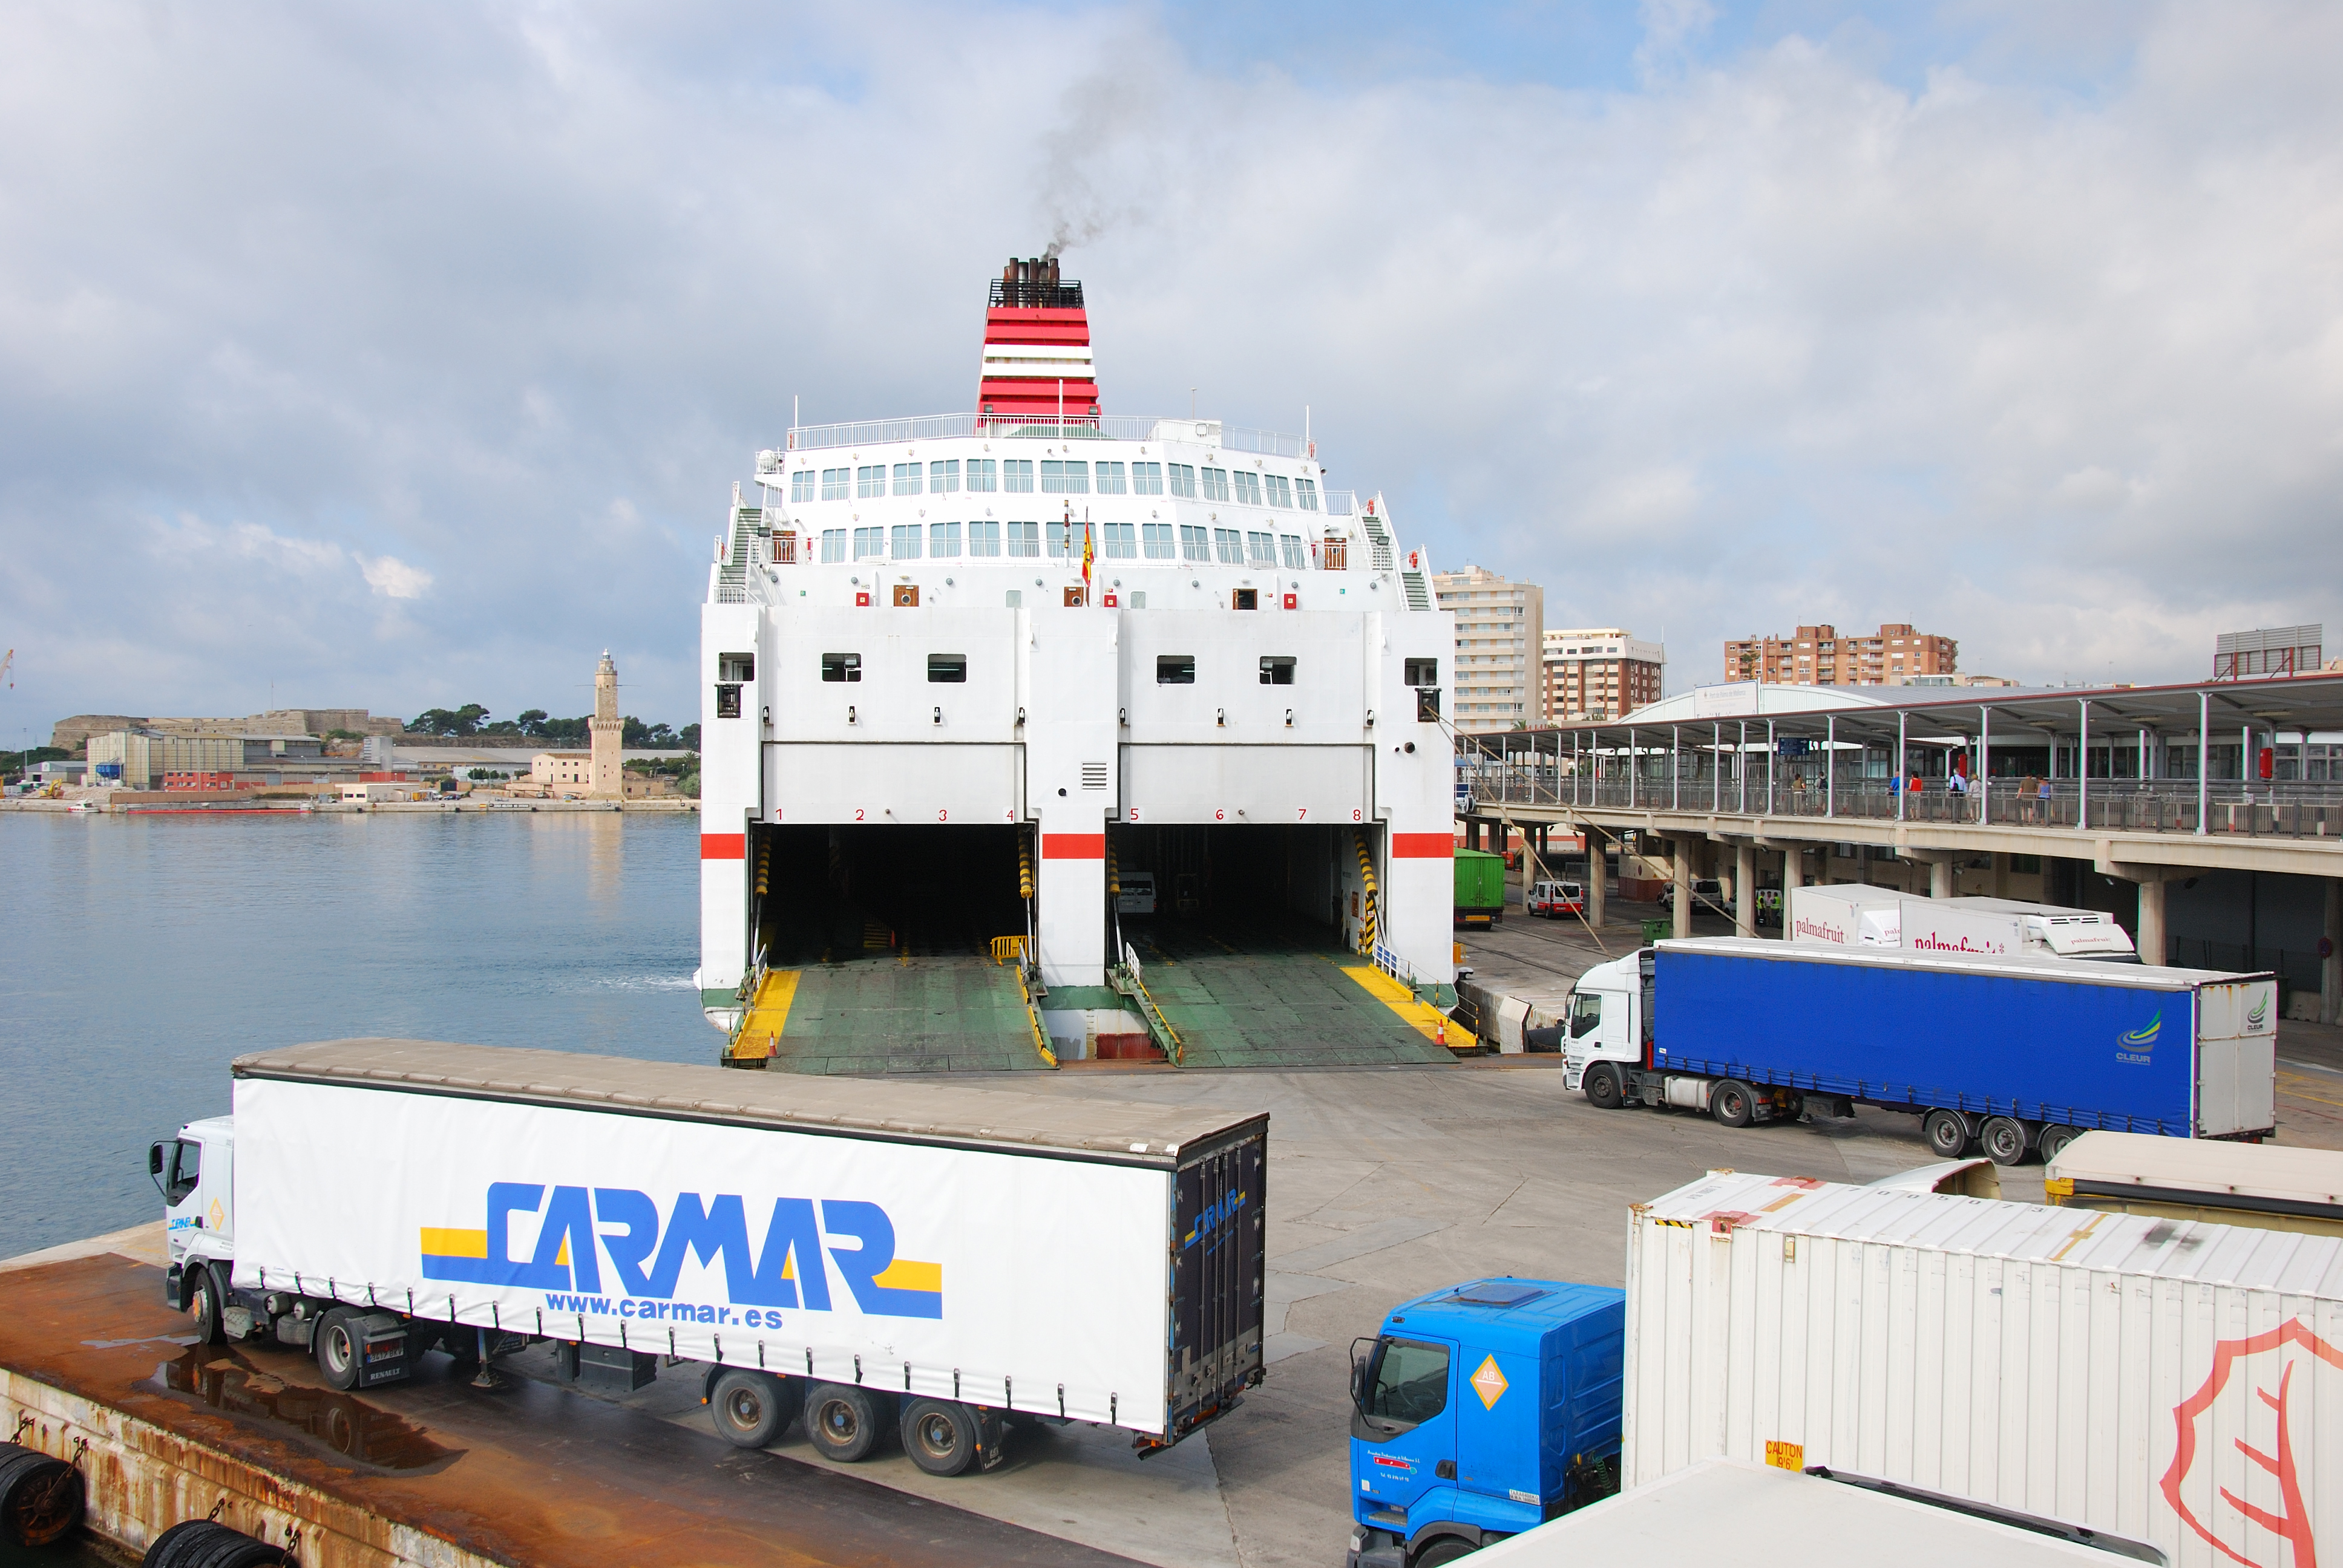 The ports of the Balearic Islands handled over 13 million tonnes of cargo in 2015